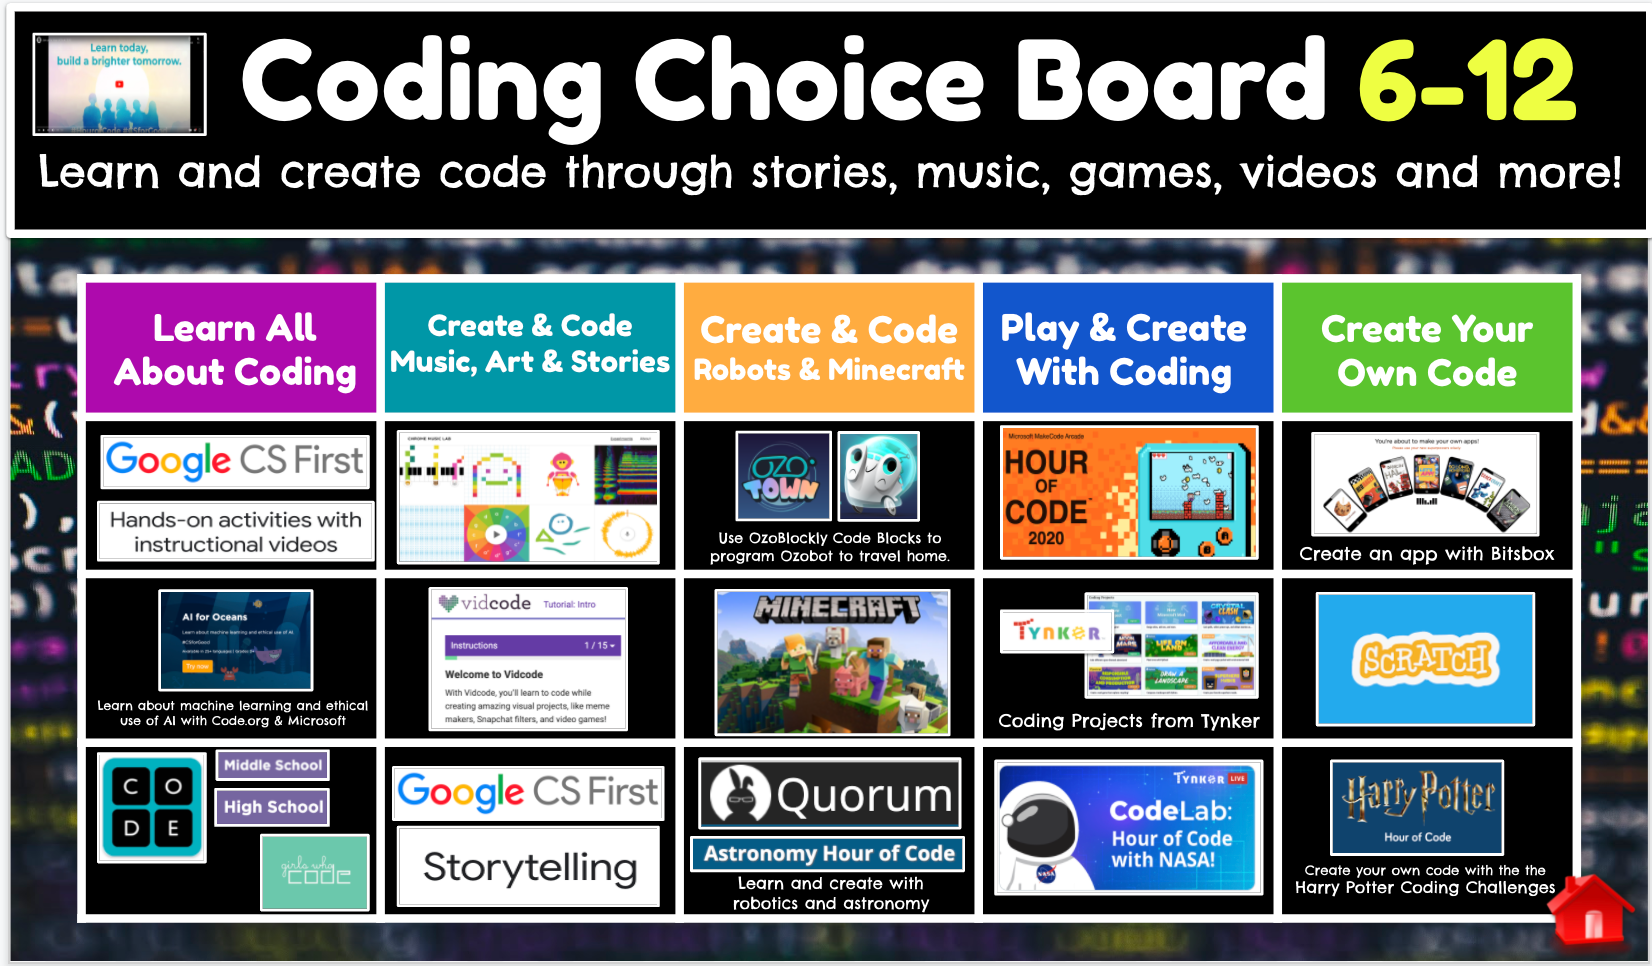 Coding Choice Board for grades 6 to 12. Learn and Create code through stories, music, games, videos, and more! Different options and apps/programs to learn about coding, create and code music, art, and stories, create and code robots and minecraft, play and create with coding, create your own code